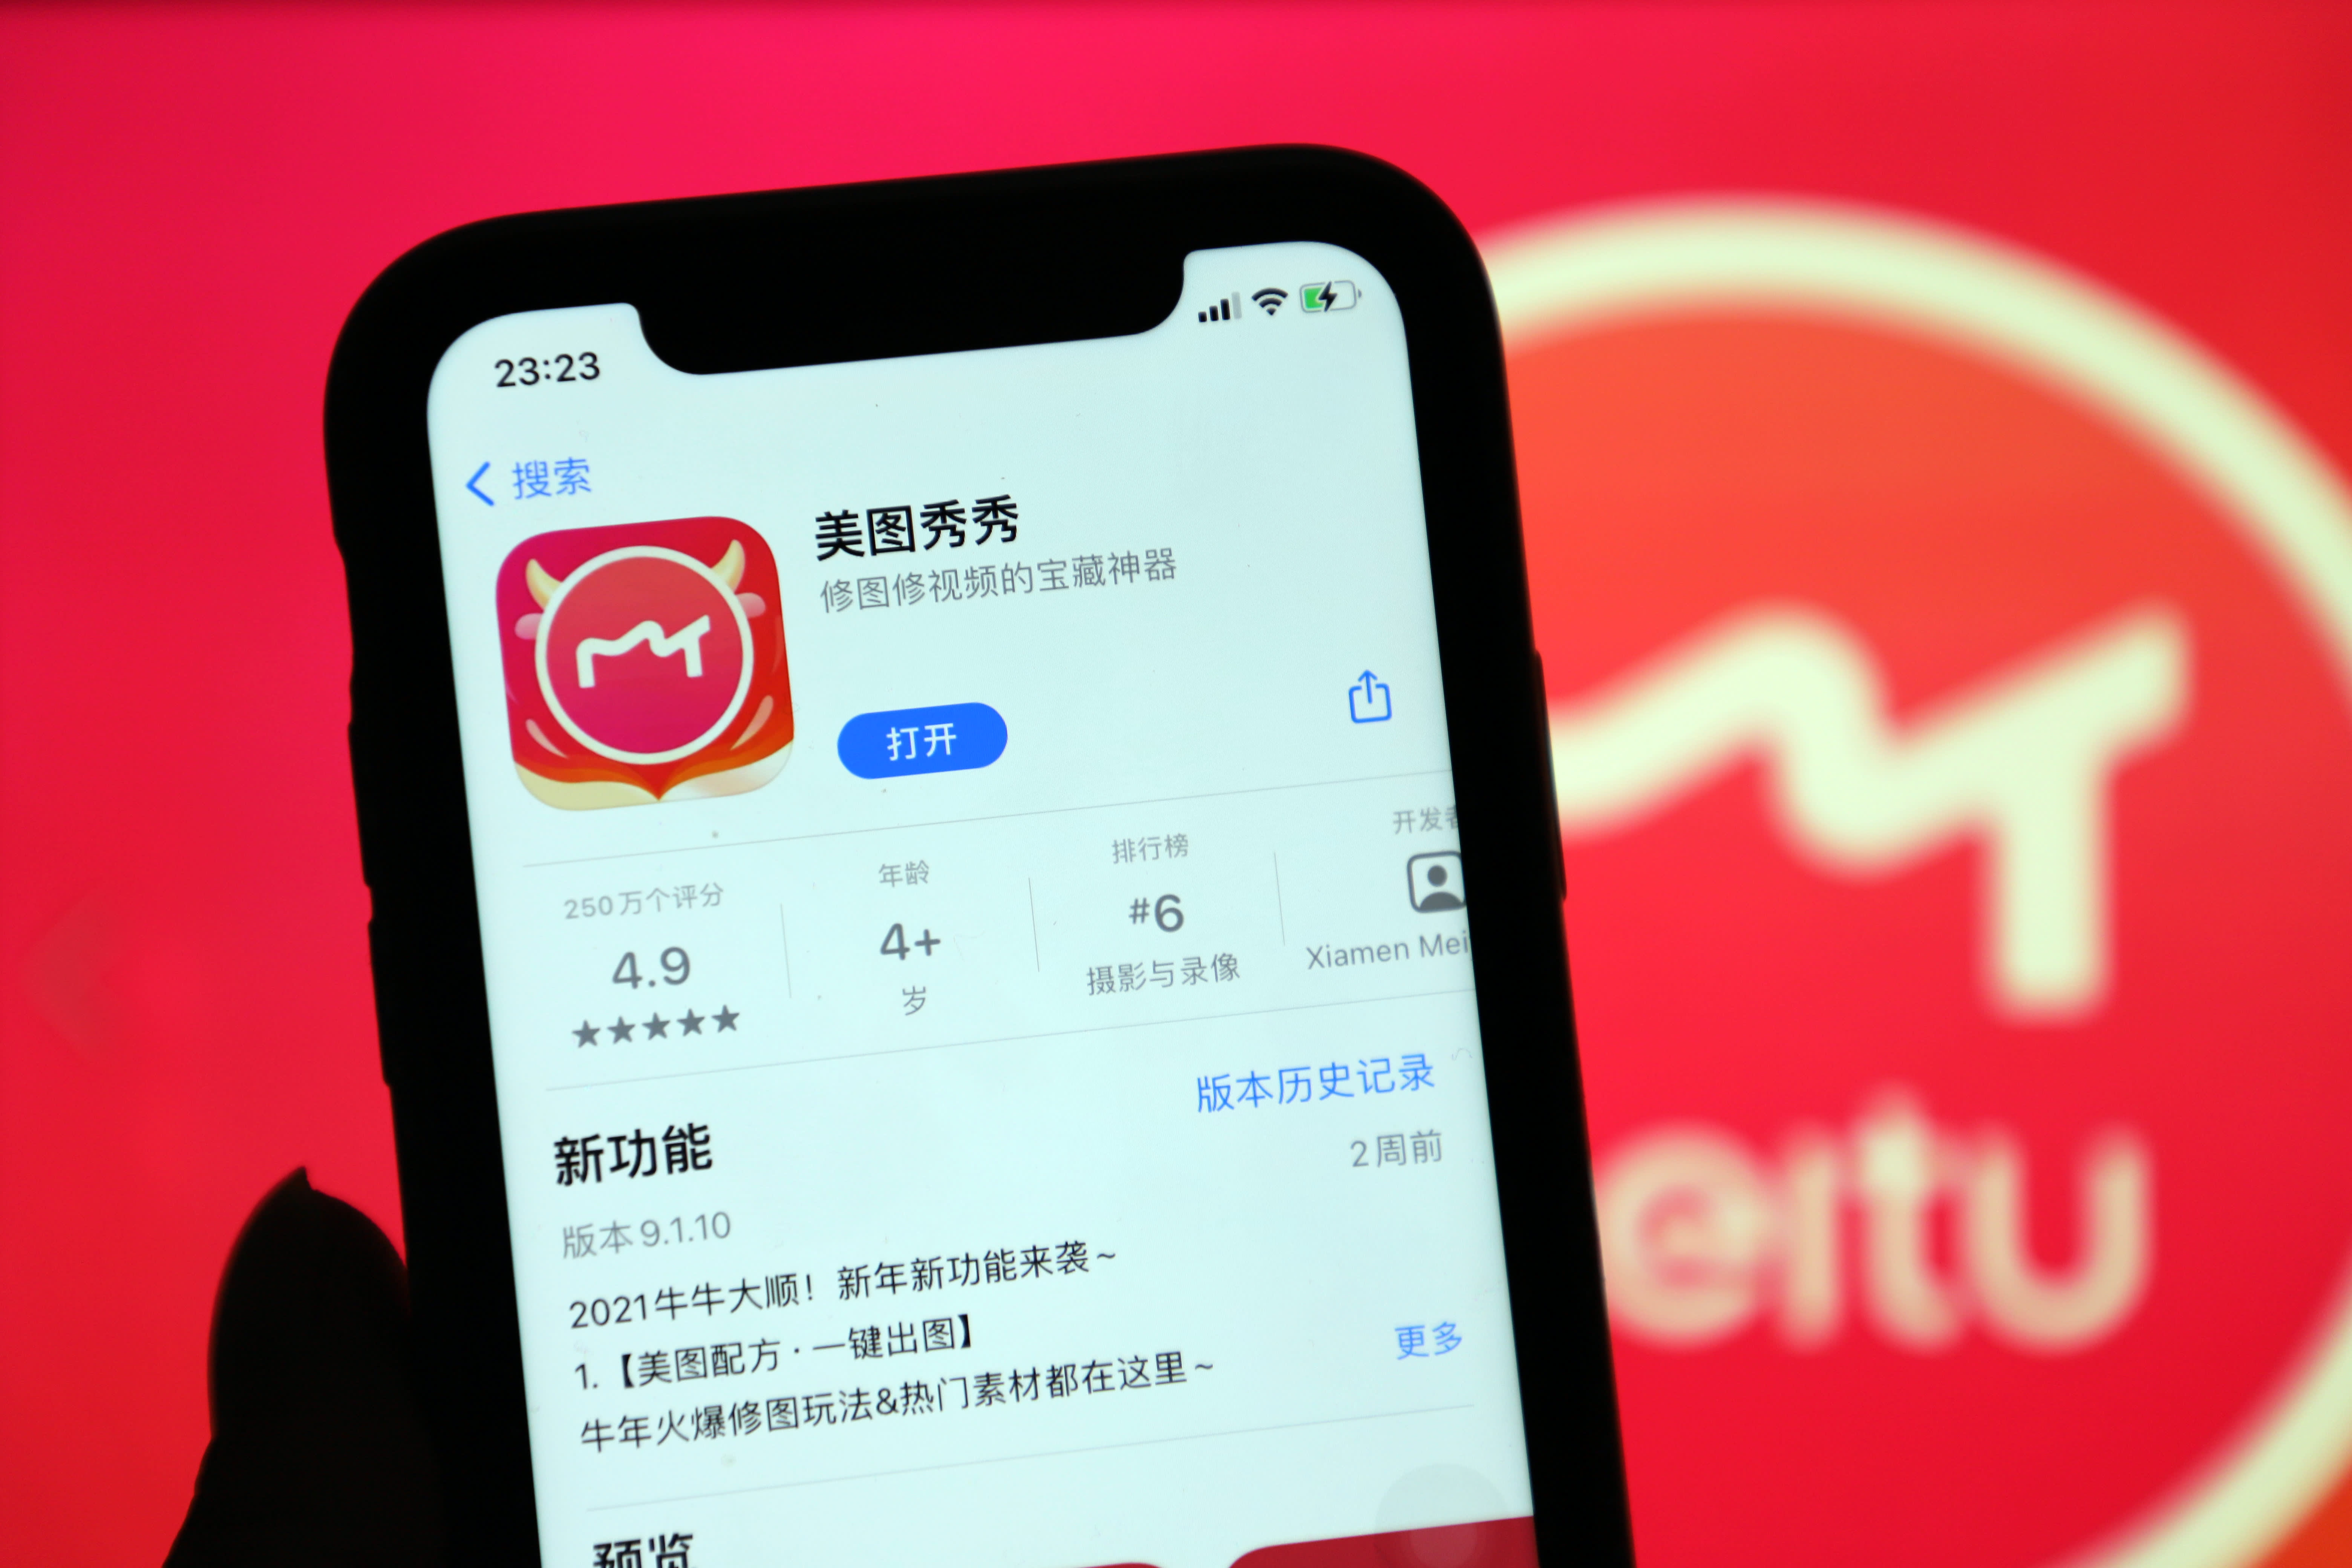 The Chinese application Meitu buys bitcoin and ethereum worth millions of euros